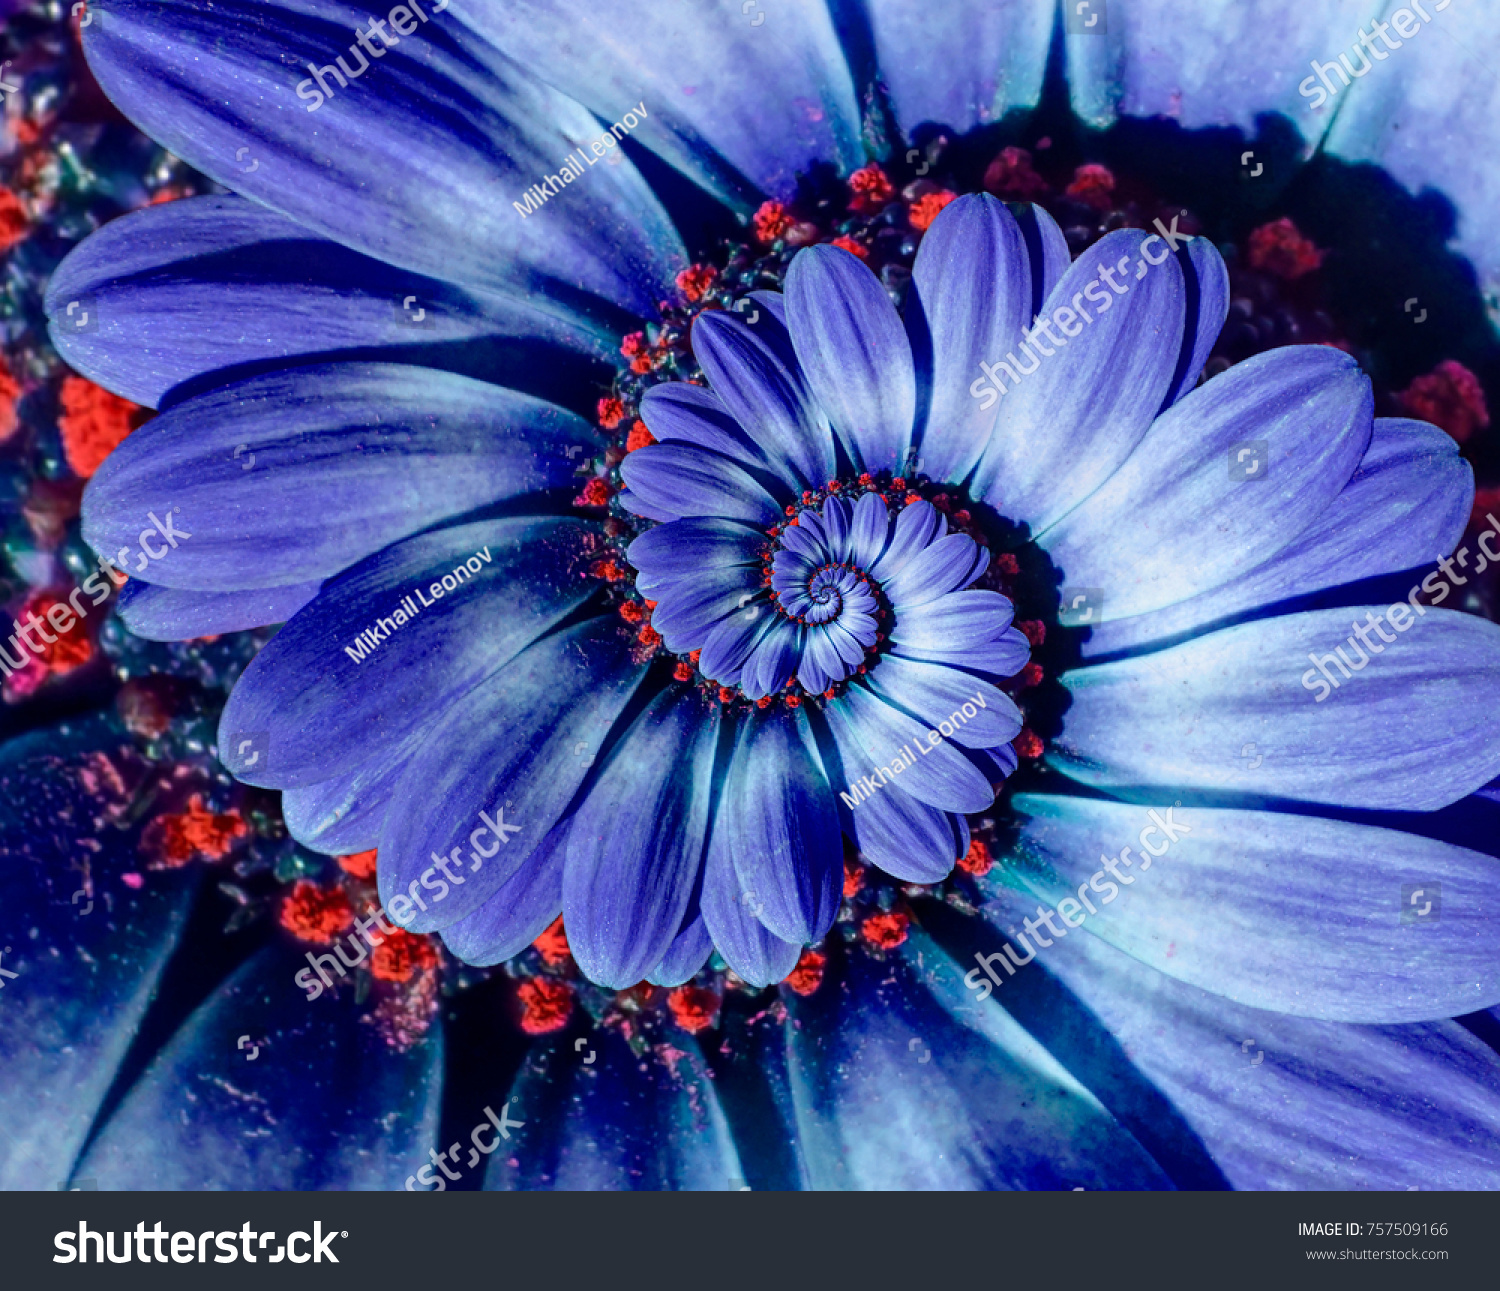 Blue camomile daisy flower spiral abstract fractal effect pattern background. Blue violet navy flower spiral abstract pattern fractal. Incredible flowers pattern round circle spirally background #757509166